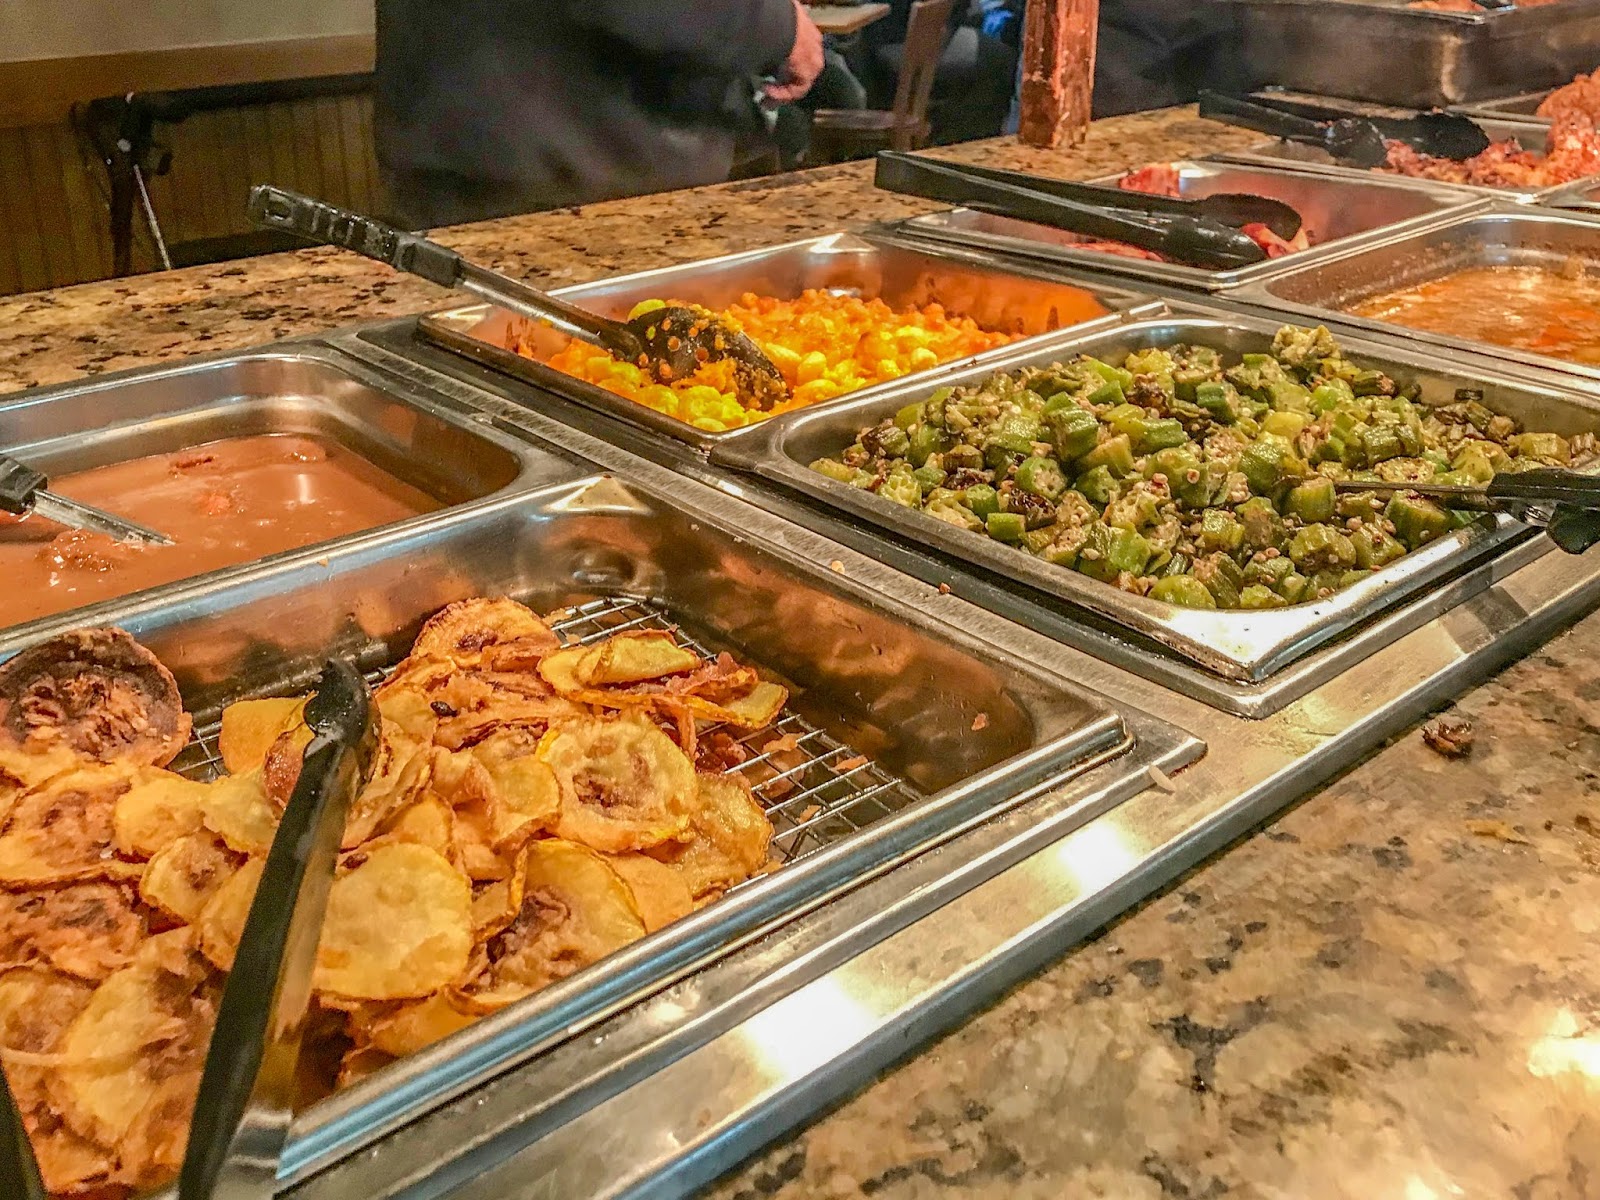 If you like Southern Style Comfort Foods You'll love this Buffet in